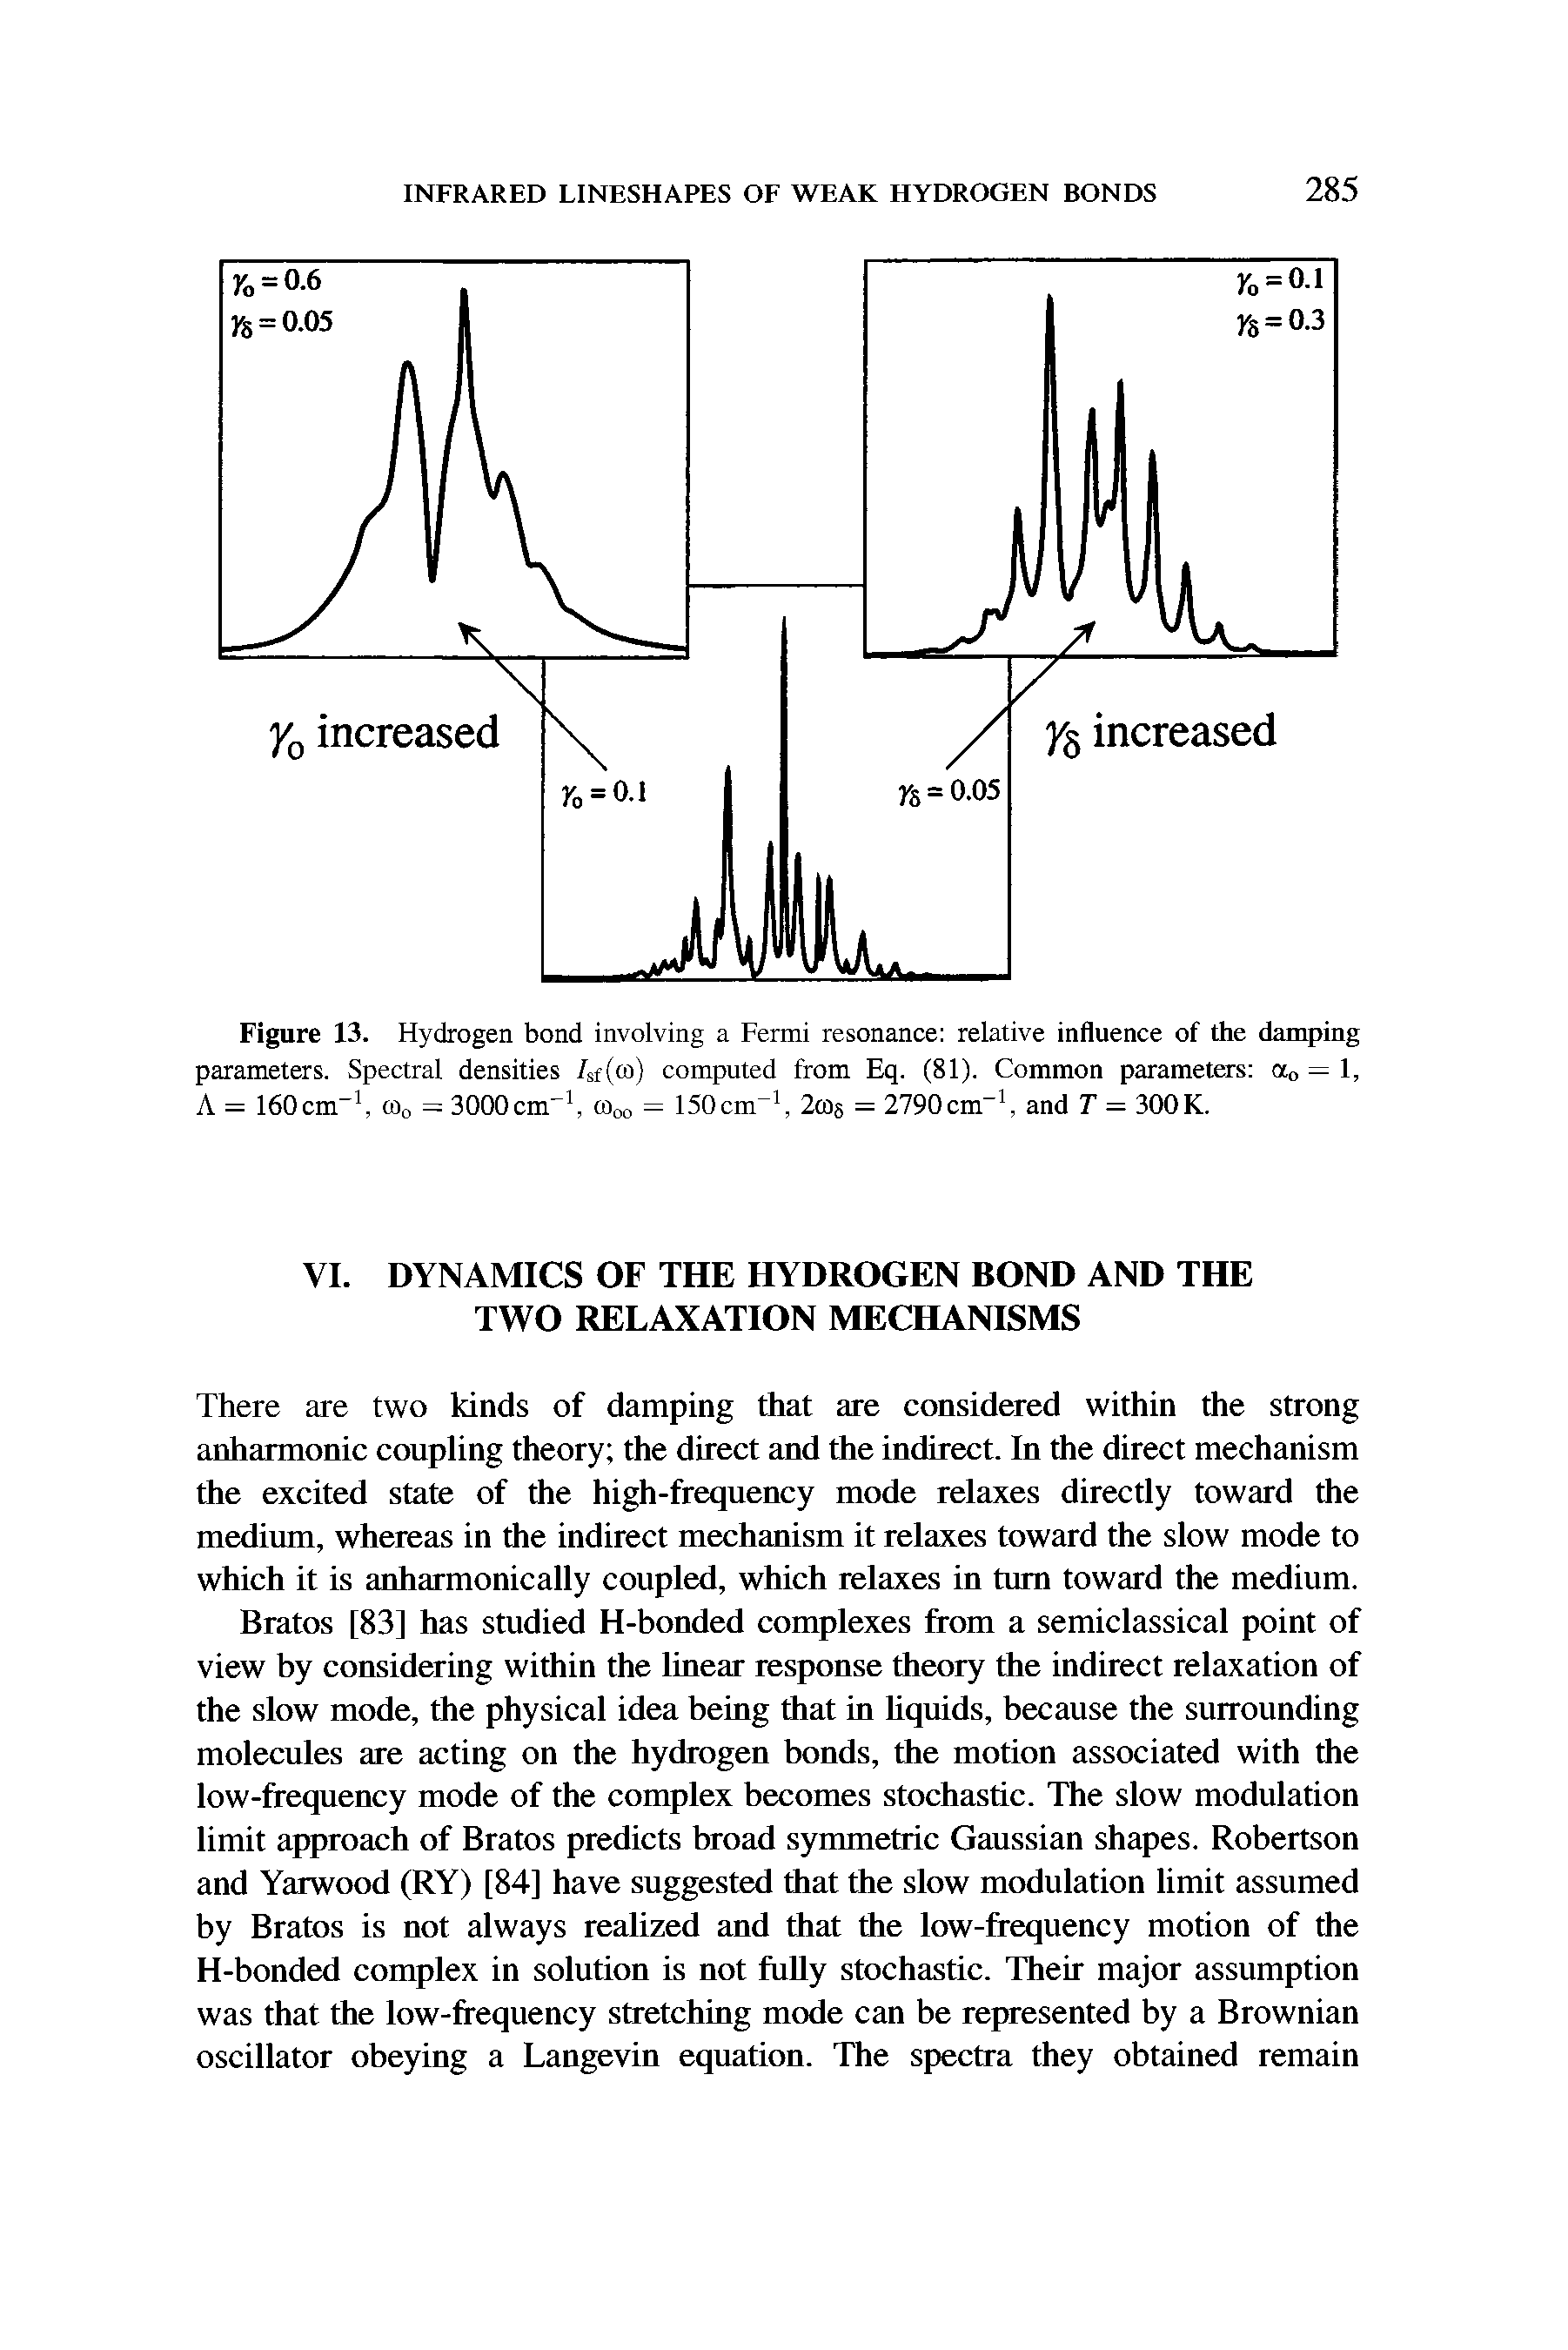 Figure 13. Hydrogen bond involving a Fermi resonance relative influence of the damping parameters. Spectral densities 7sf(co) computed from Eq. (81). Common parameters a0 = 1, A = 160cm-1, co0 = 3000cm-1, co00 = 150cm-1, 2t05 = 2790cm-1, and T = 300K.